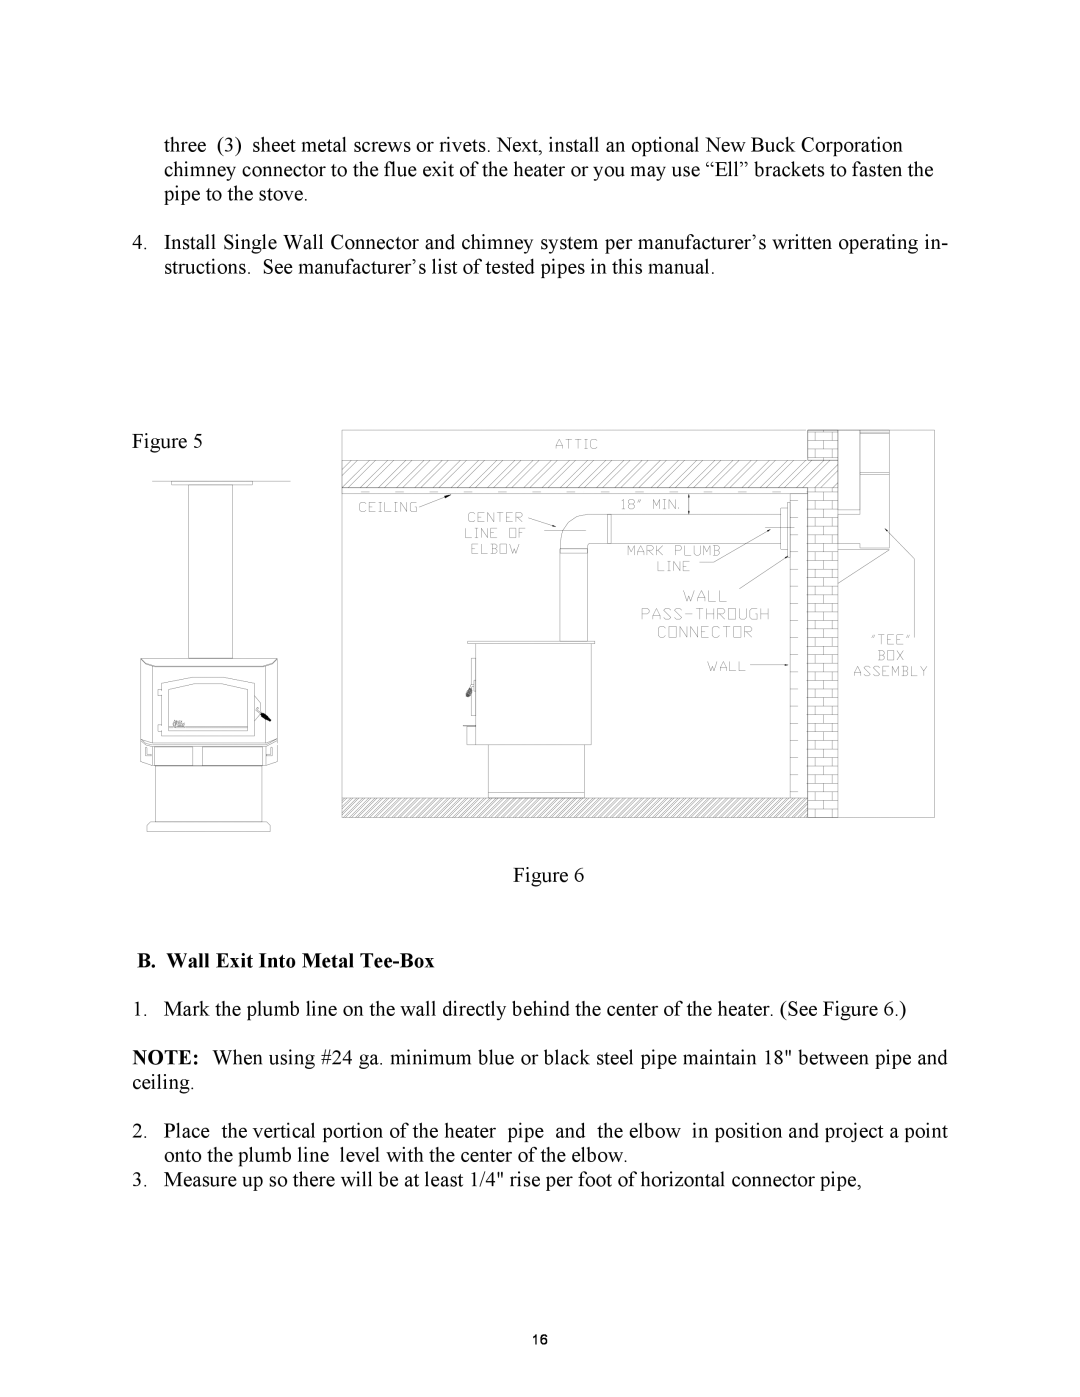 New Buck Corporation 85 installation instructions B.Wall Exit Into Metal Tee-Box 